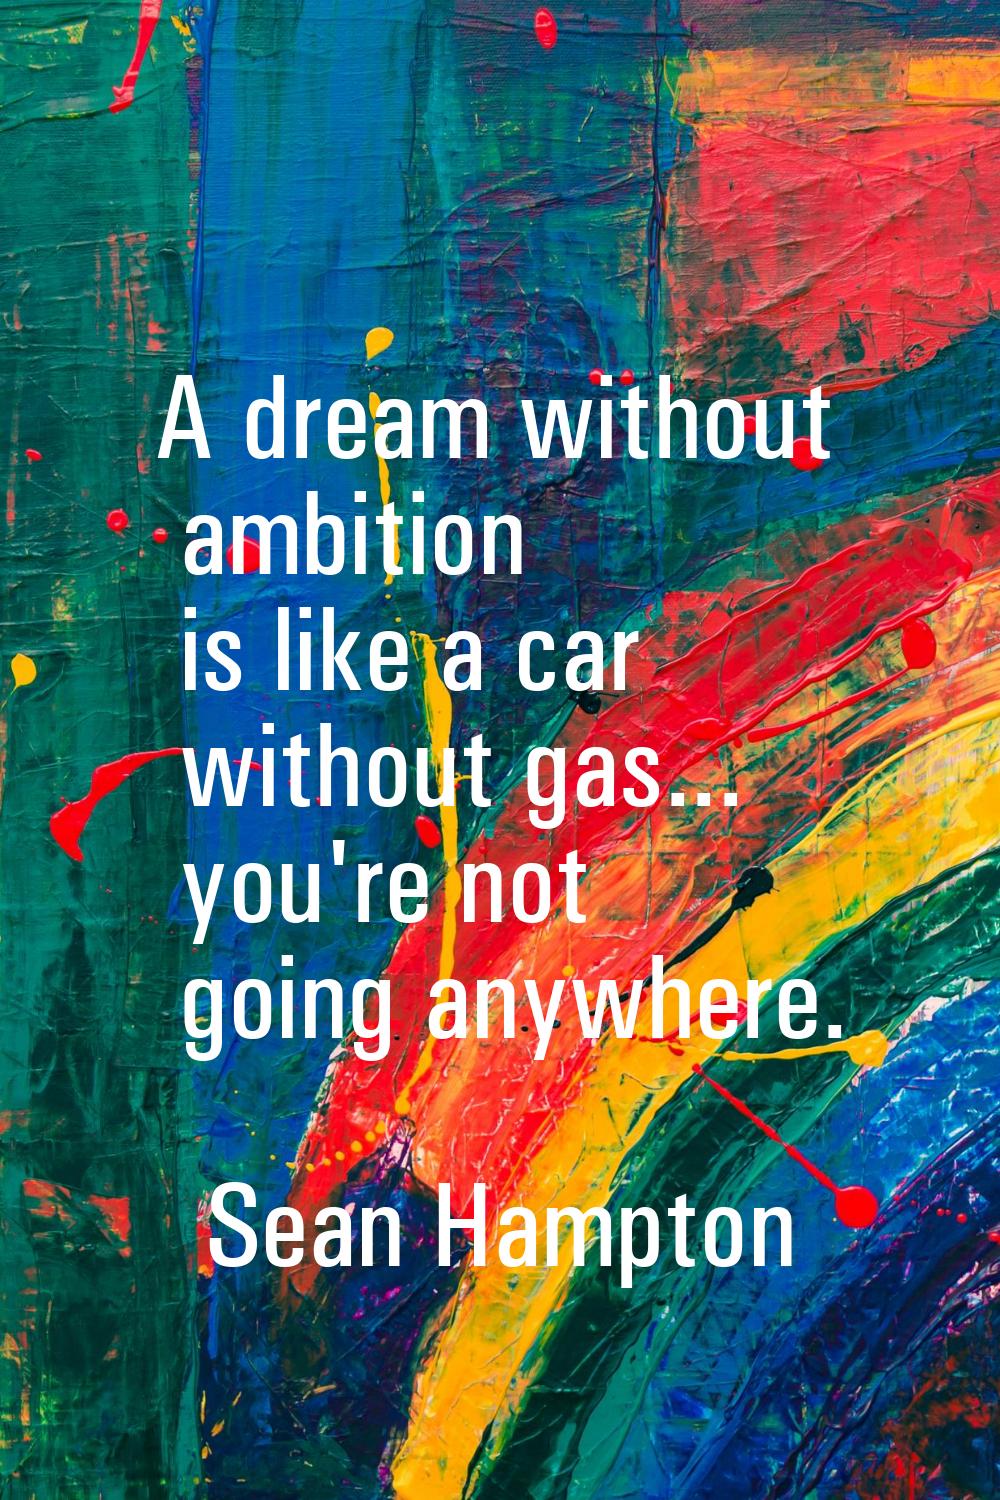 A dream without ambition is like a car without gas... you're not going anywhere.